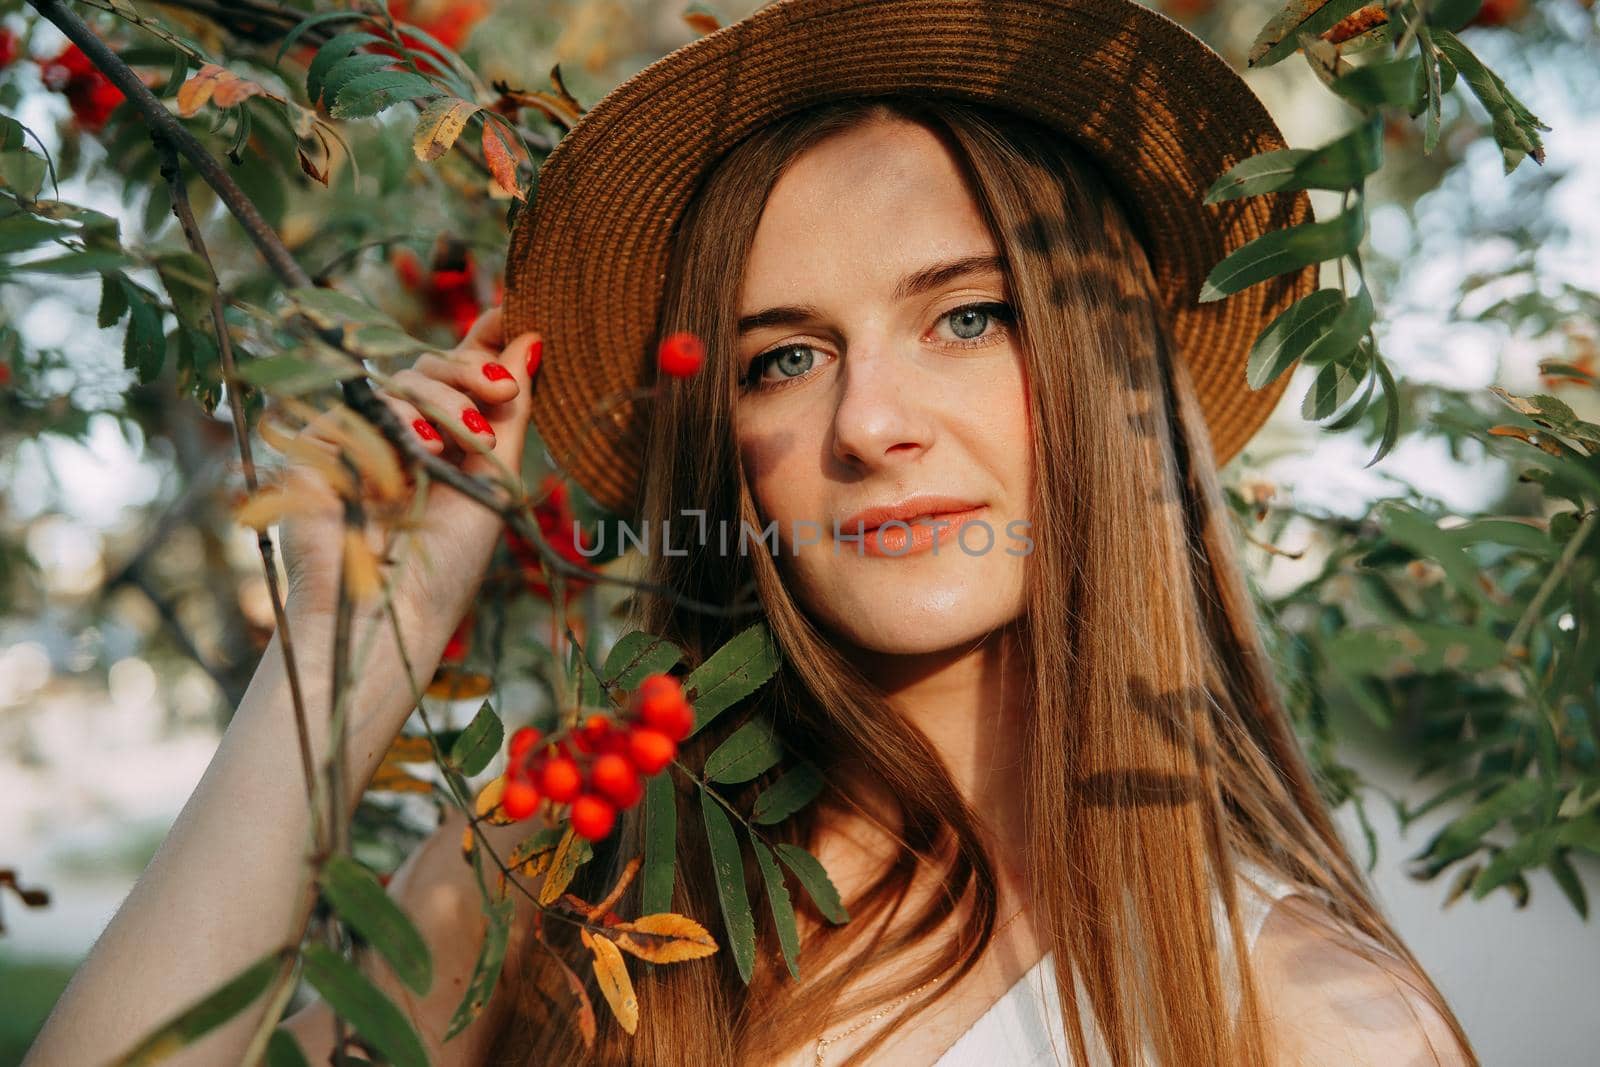 A beautiful blonde girl in a hat with long hair, on a walk in the autumn season. Portrait of a woman at a rowan tree by Annu1tochka